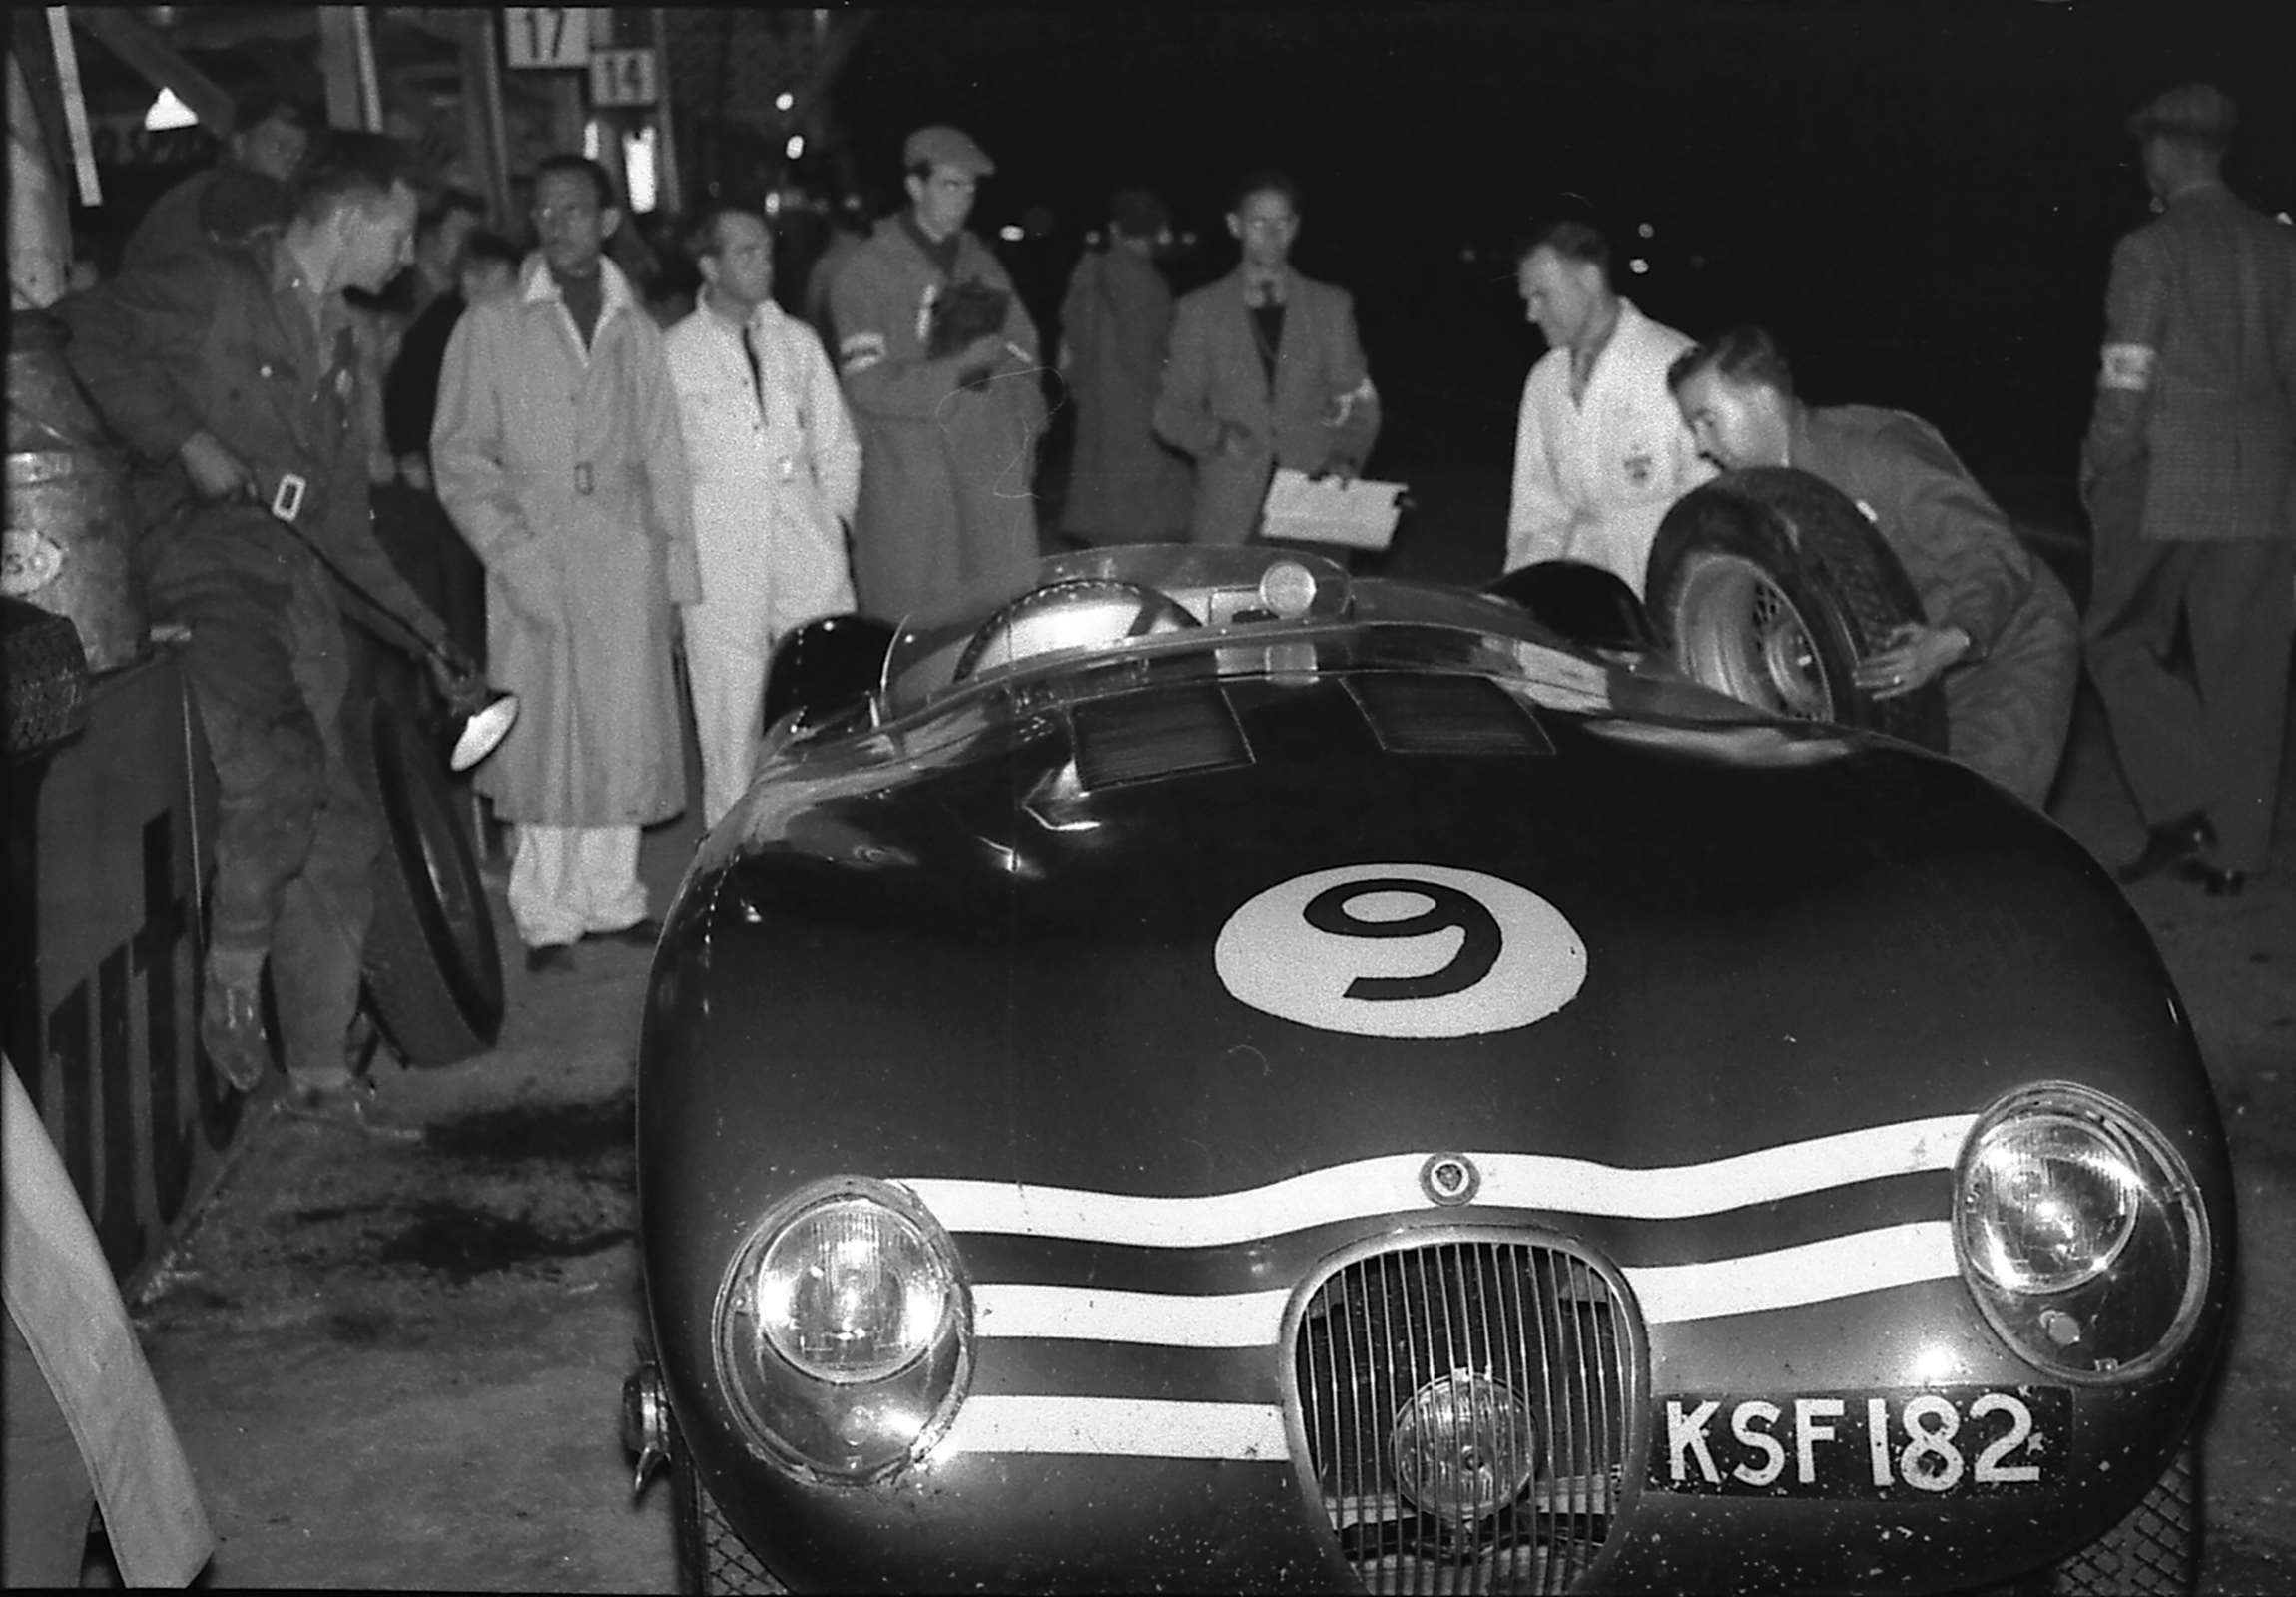 Early years at Goodwood - 1953 Nine Hour race - night pit-stop for the 5th-placed Jock Lawrence/Frank Curtis Ecosse Jaguar C-Type